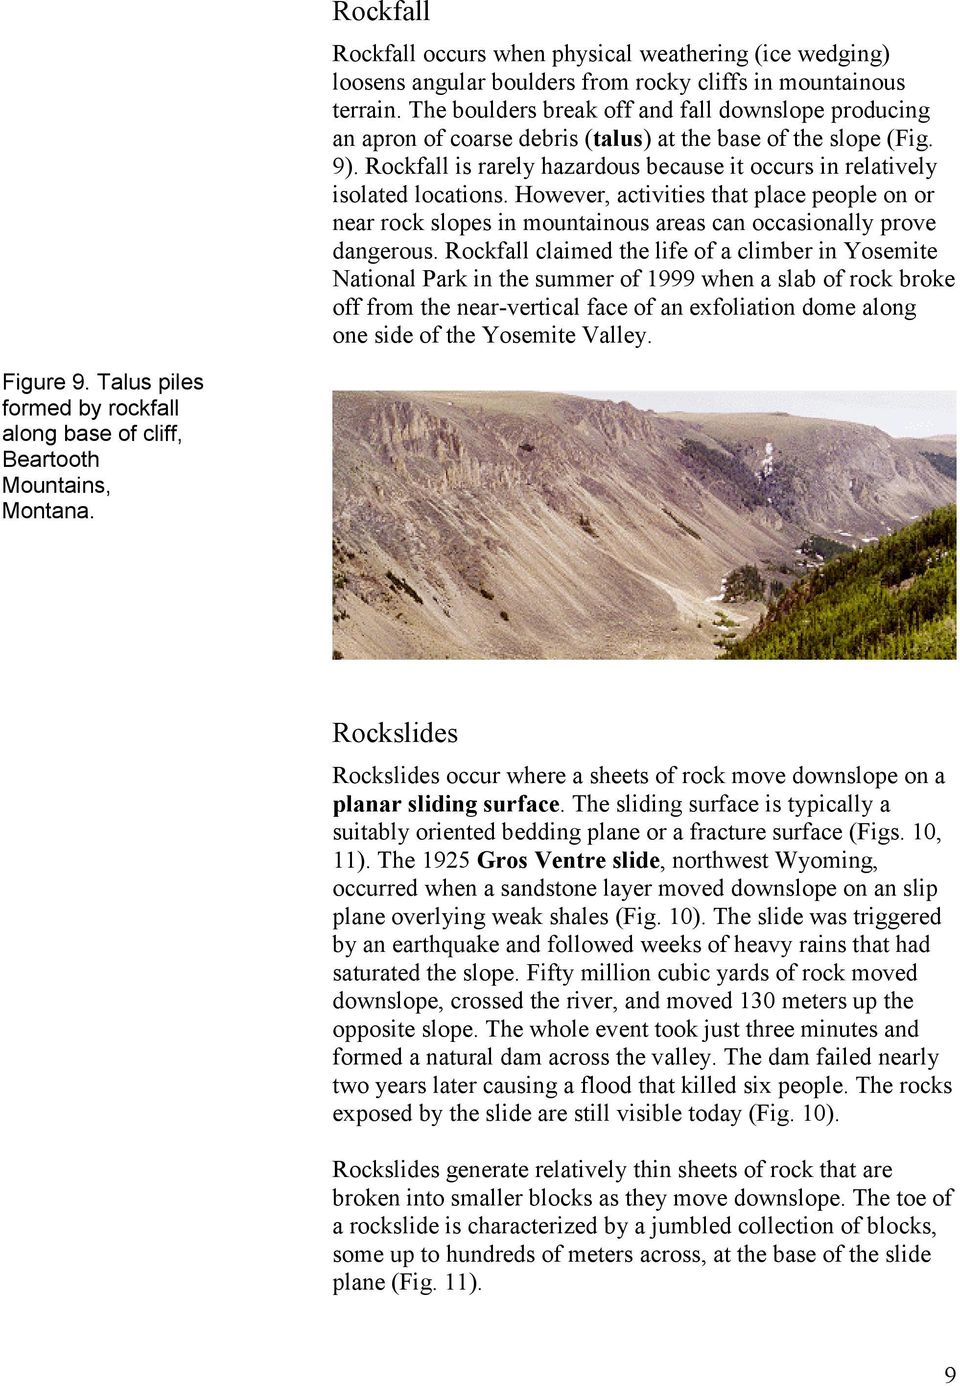 Rockfall is rarely hazardous because it occurs in relatively isolated locations. However, activities that place people on or near rock slopes in mountainous areas can occasionally prove dangerous.